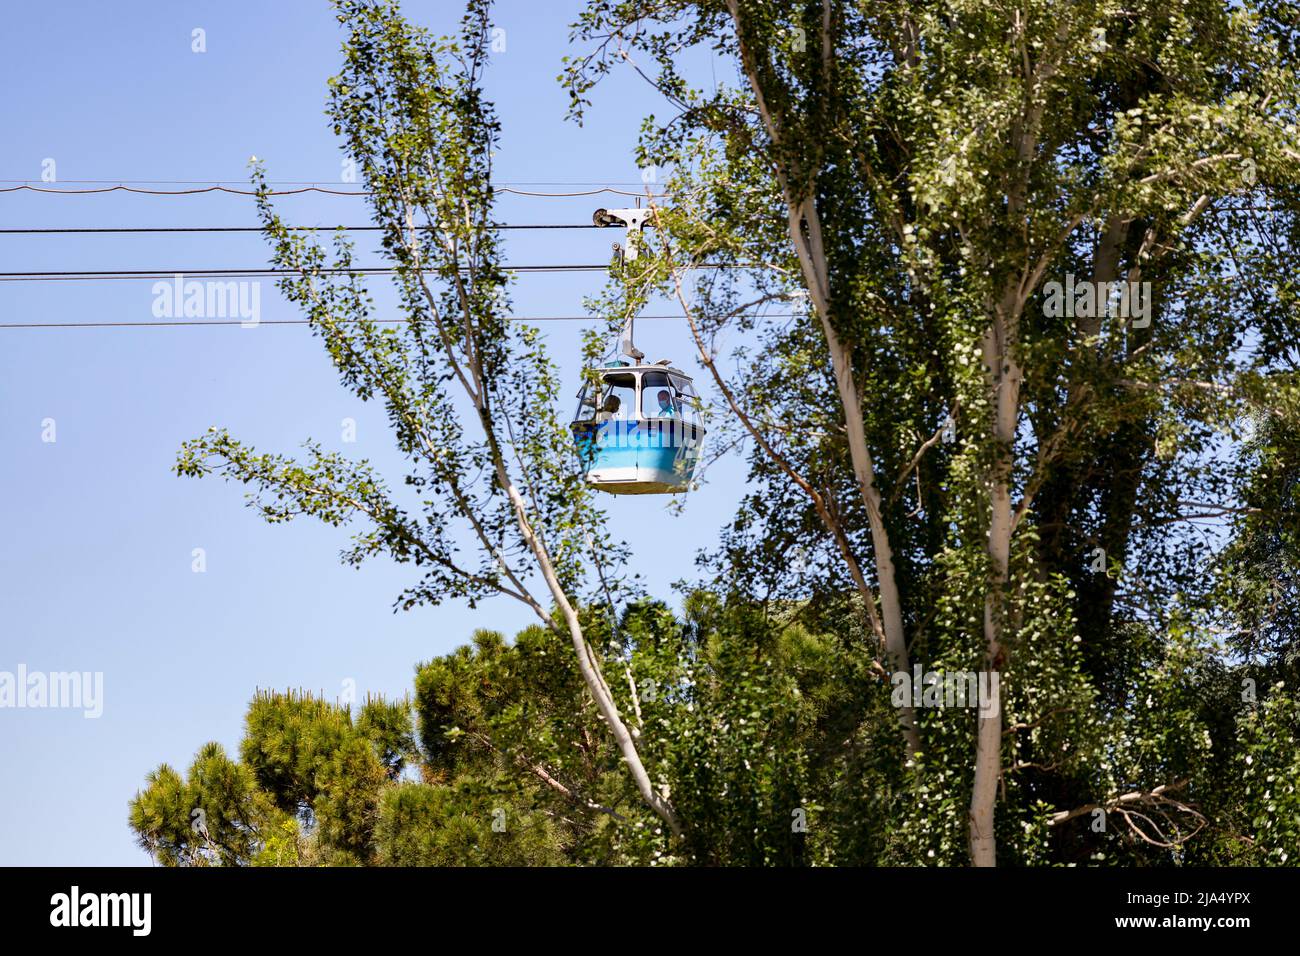 Cableway. Cable car in Madrid that connects the Parque del Oeste with the Casa de Campo in Madrid. Clear day with a blue sky, in Spain. Europe. Photo Stock Photo